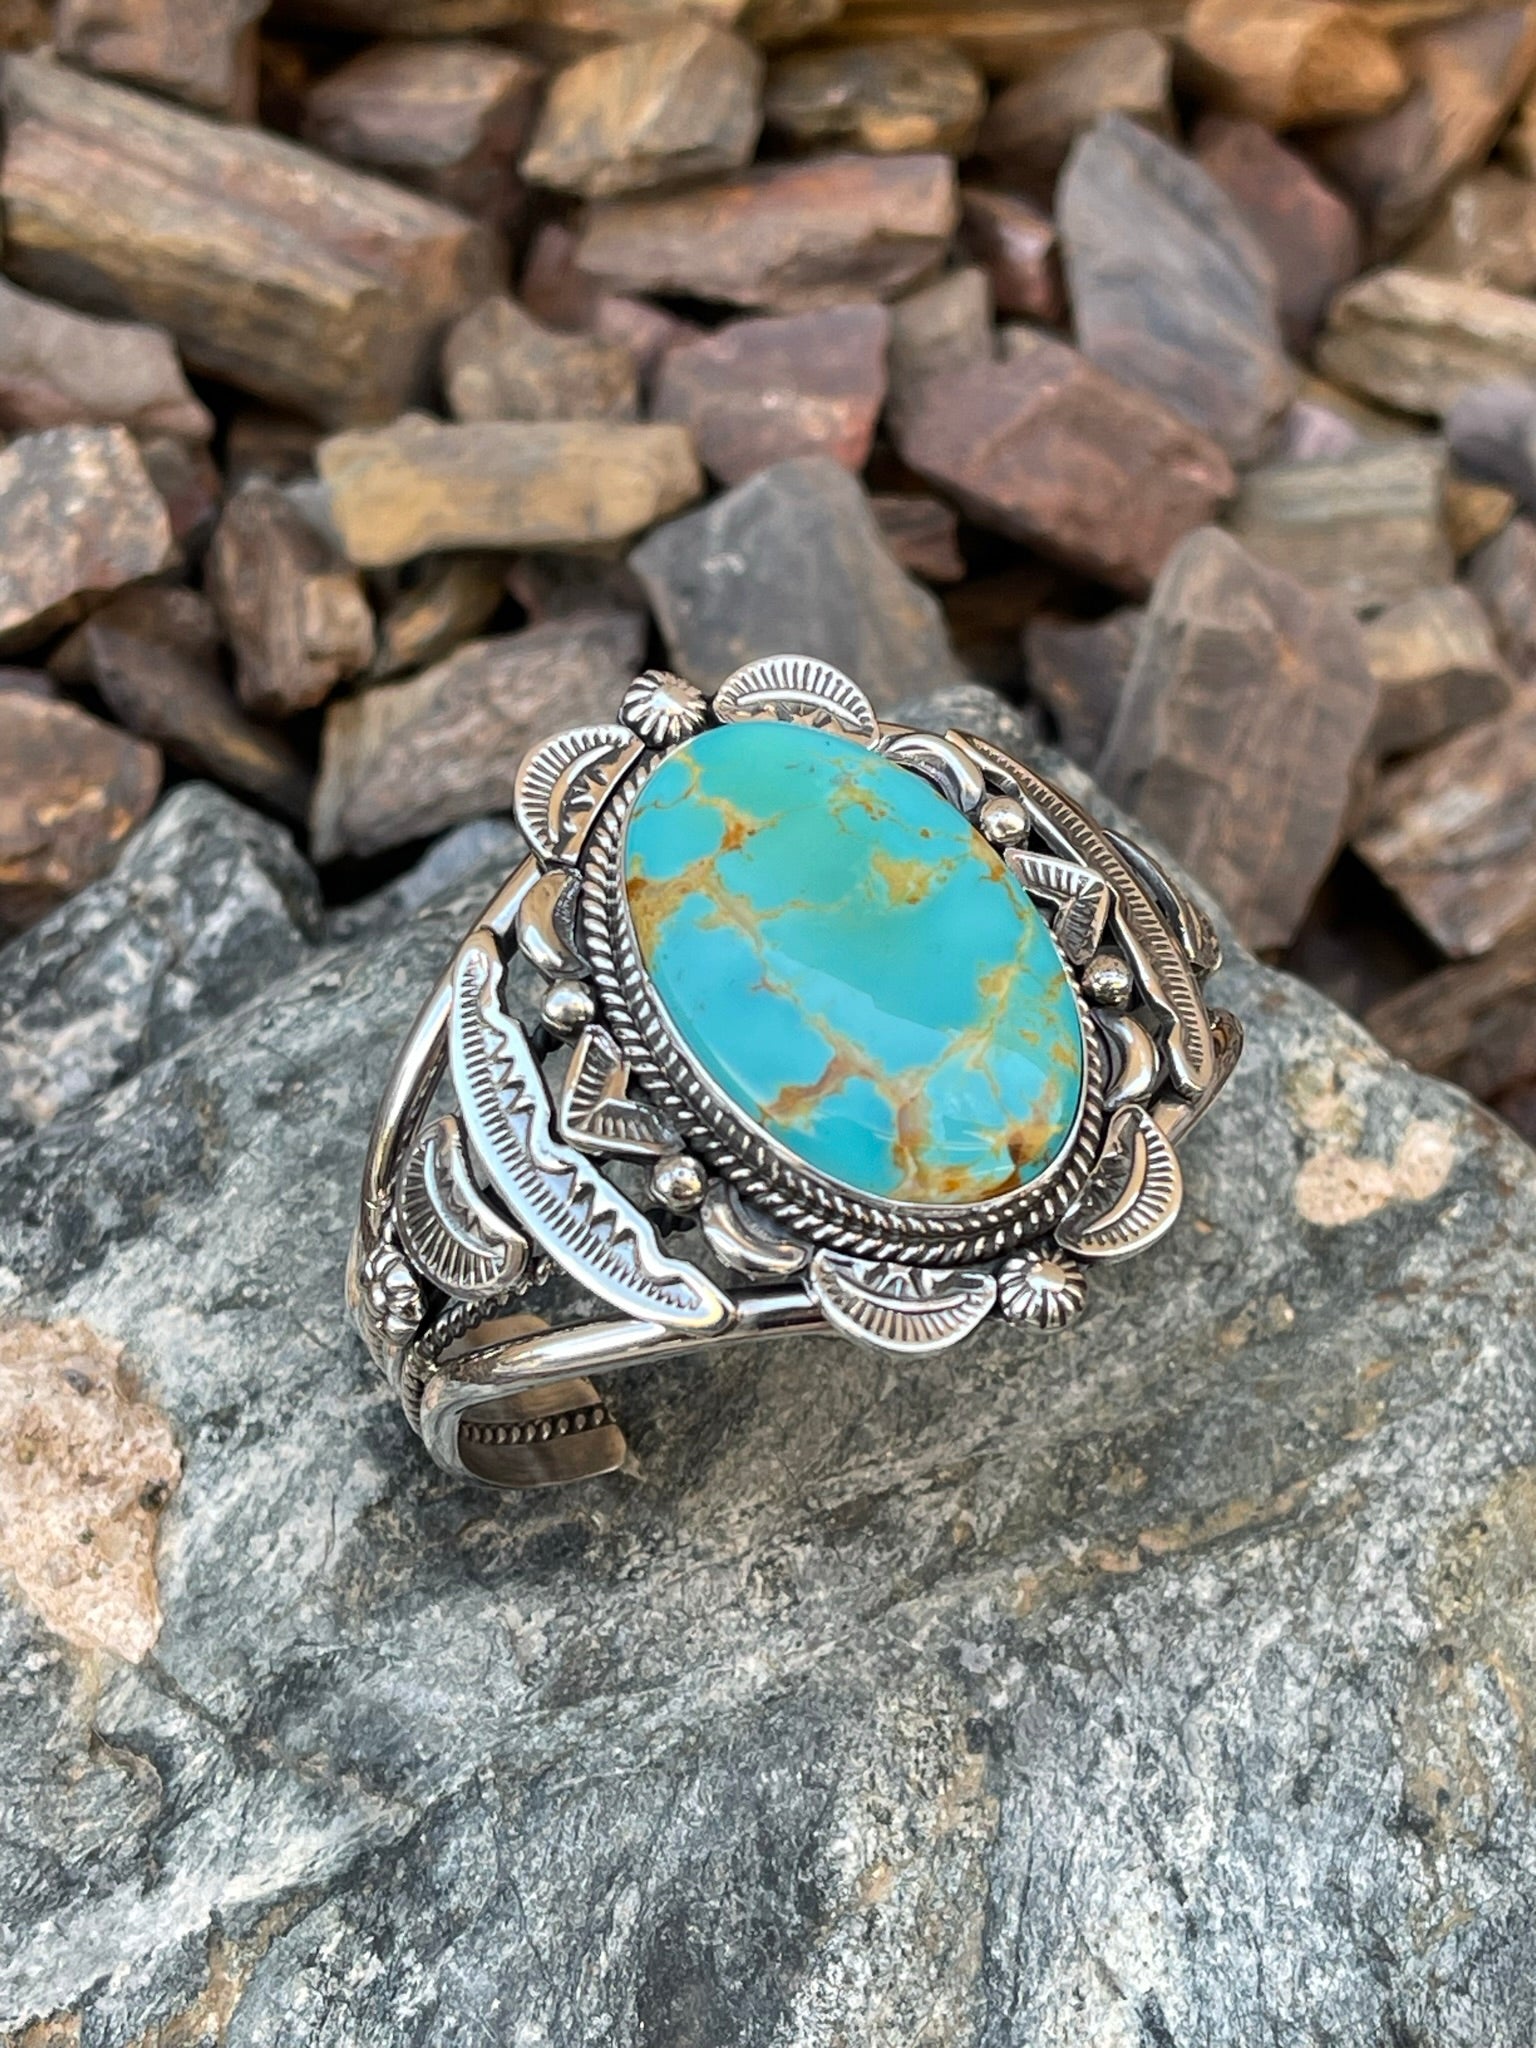 Handmade Solid Sterling Silver Royston Turquoise Bracelet with Stamp Detail